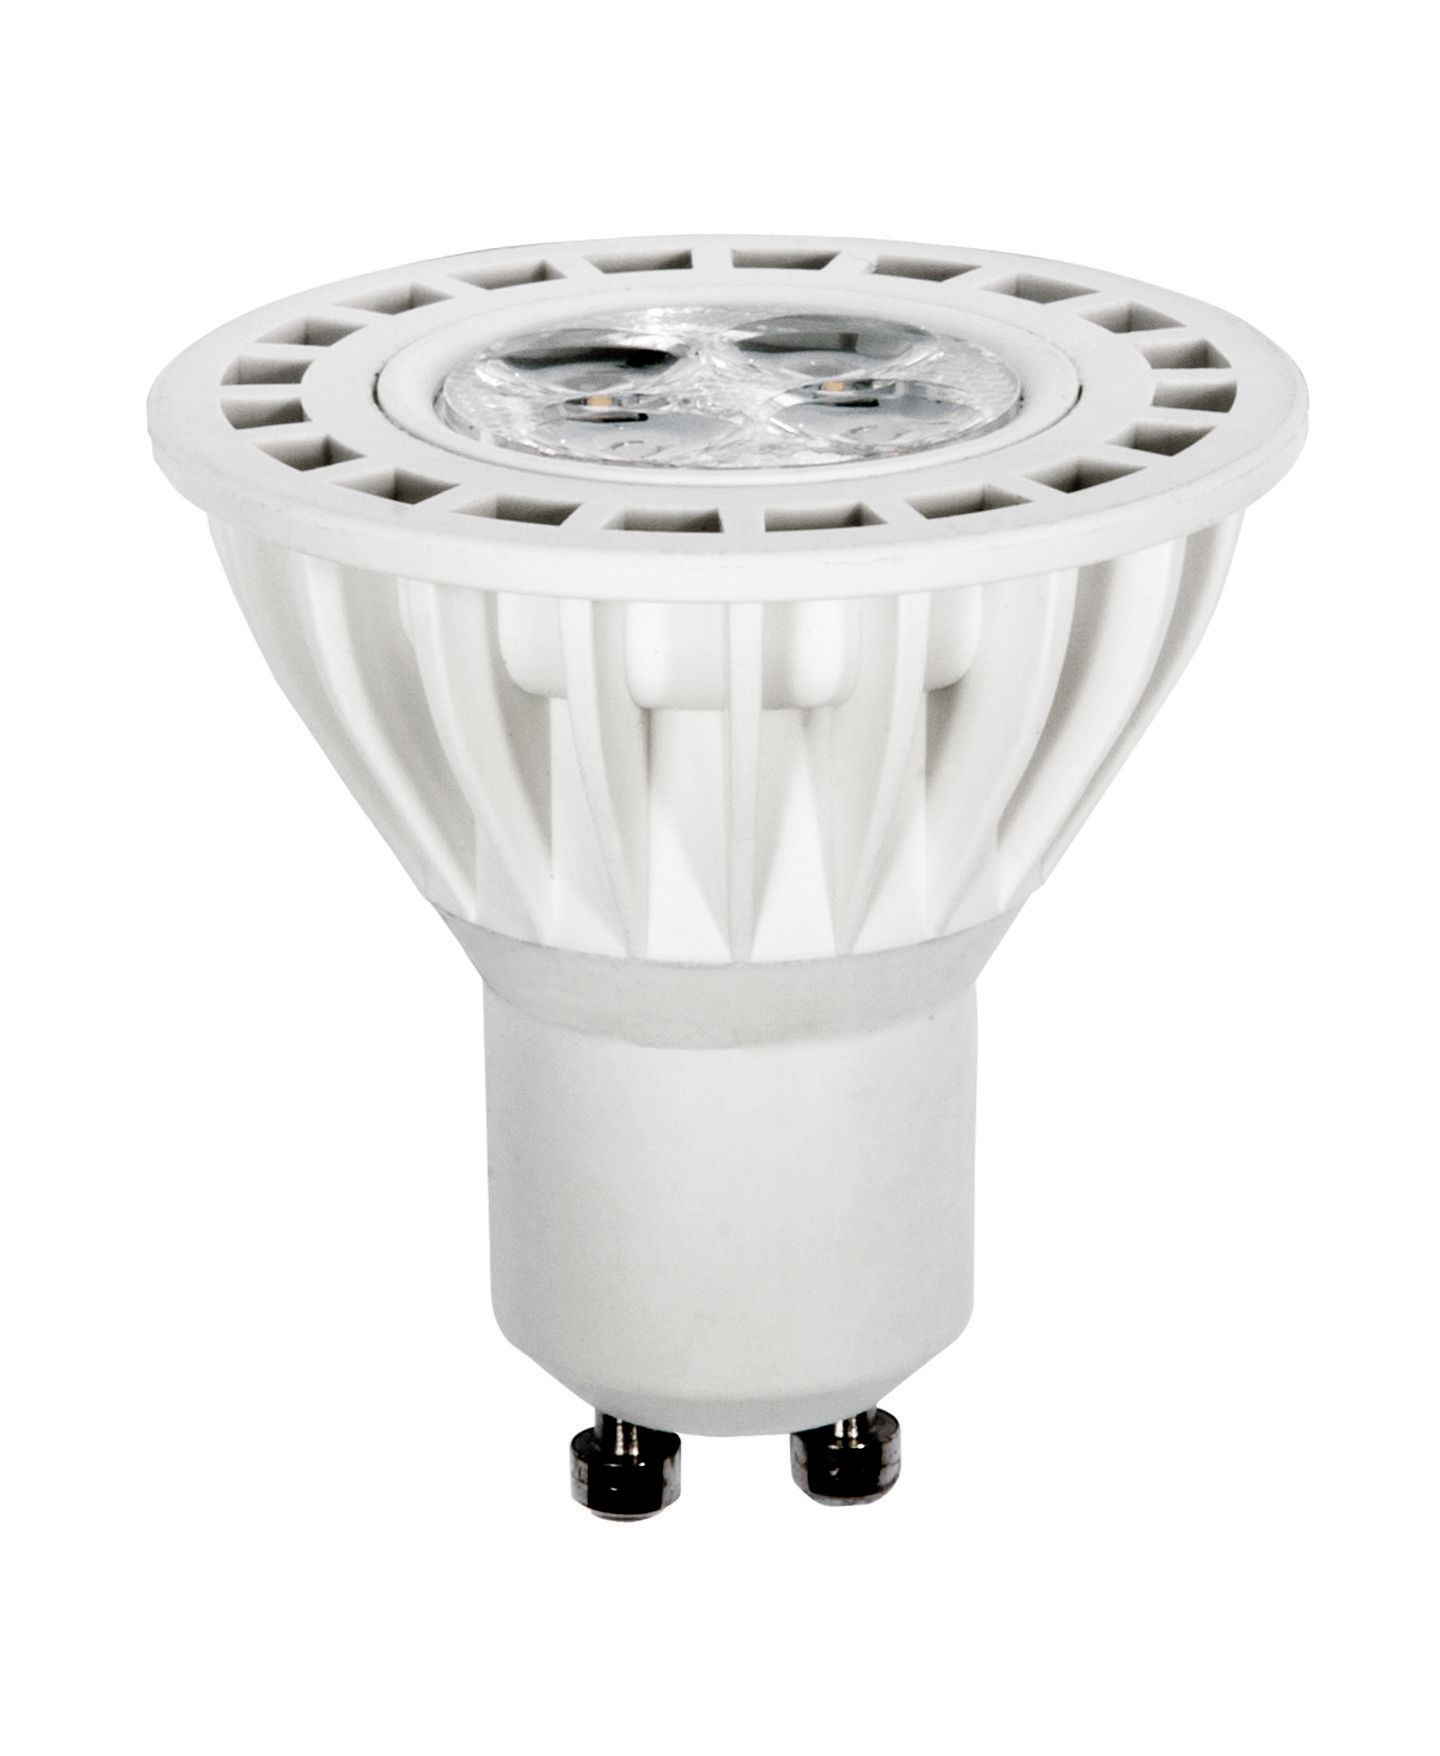 Lap 5W 220Lm Warm White Led Dimmable Light Bulb